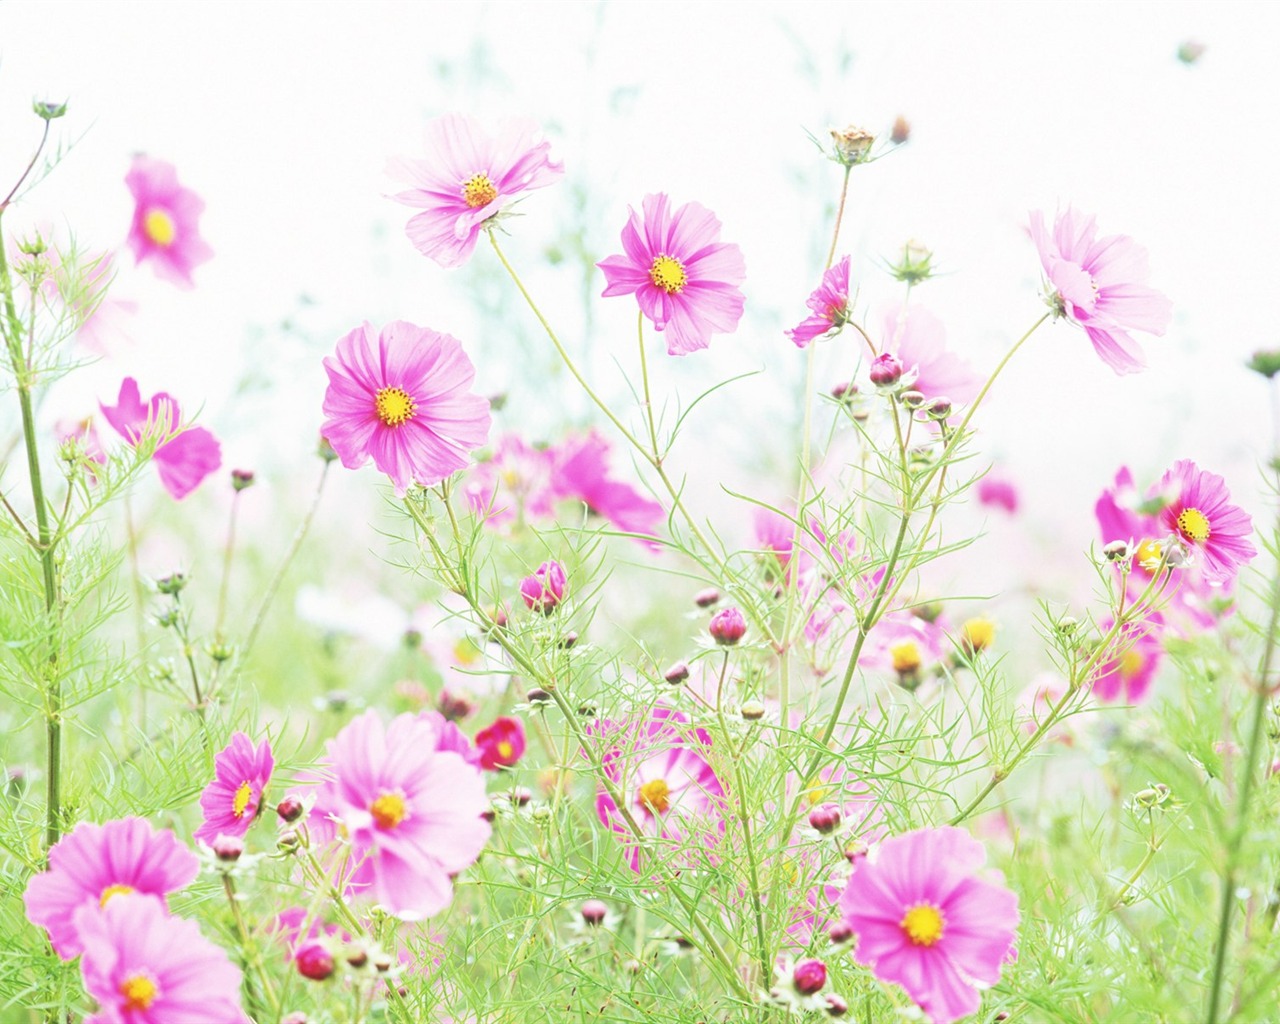 Fresh style Flowers Wallpapers #3 - 1280x1024